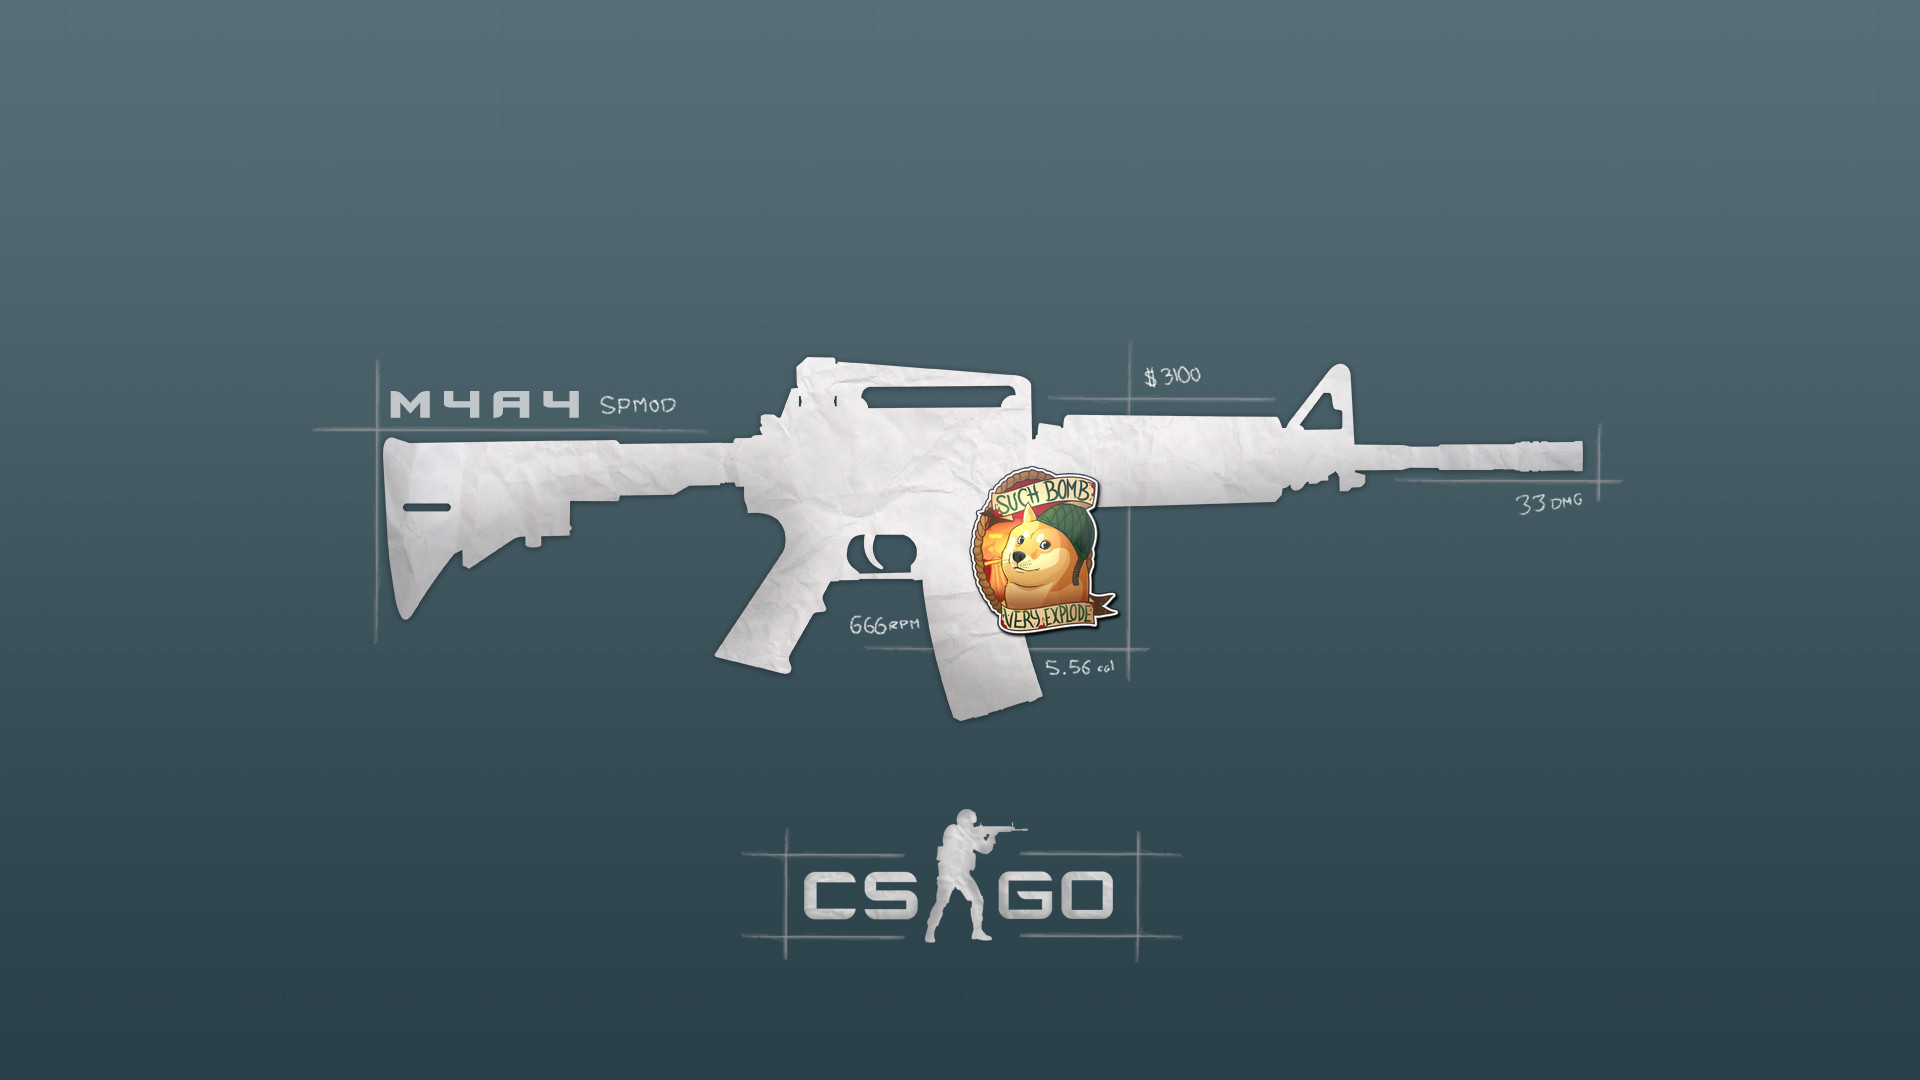 Peasantry FreeOC I Couldnt find a minimalist CSGO wallpaper so I made one, thought I would share. I did not make the doge sticker